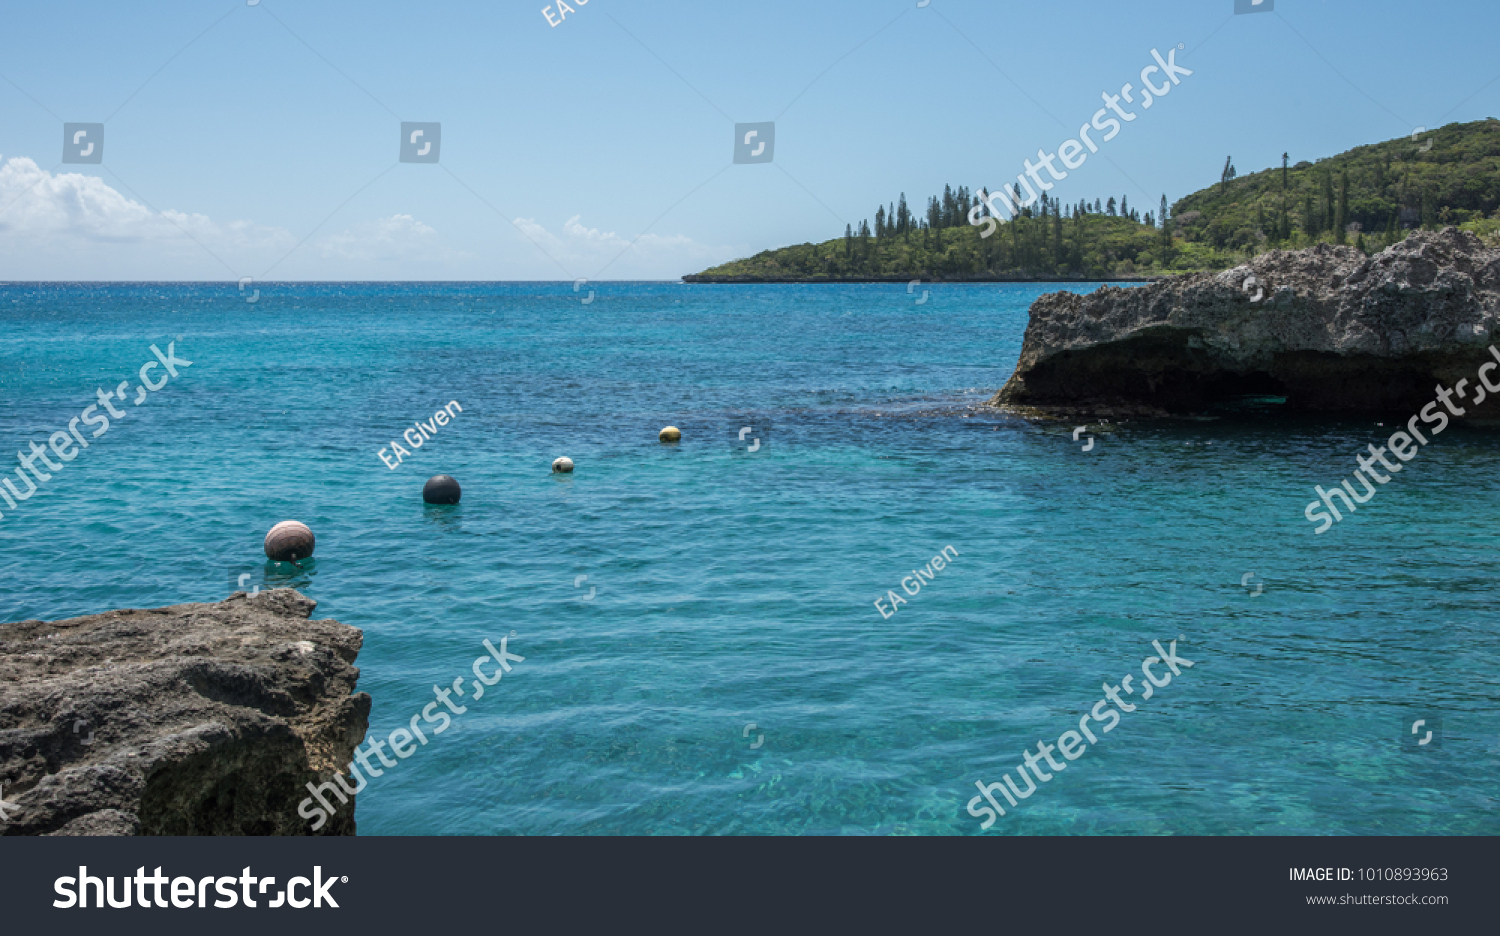 Stunning Tadine Bay with turquoise Pacific Ocean waters, lush greenery, rock and buoys on the coast of Mare, New Caledonia #1010893963